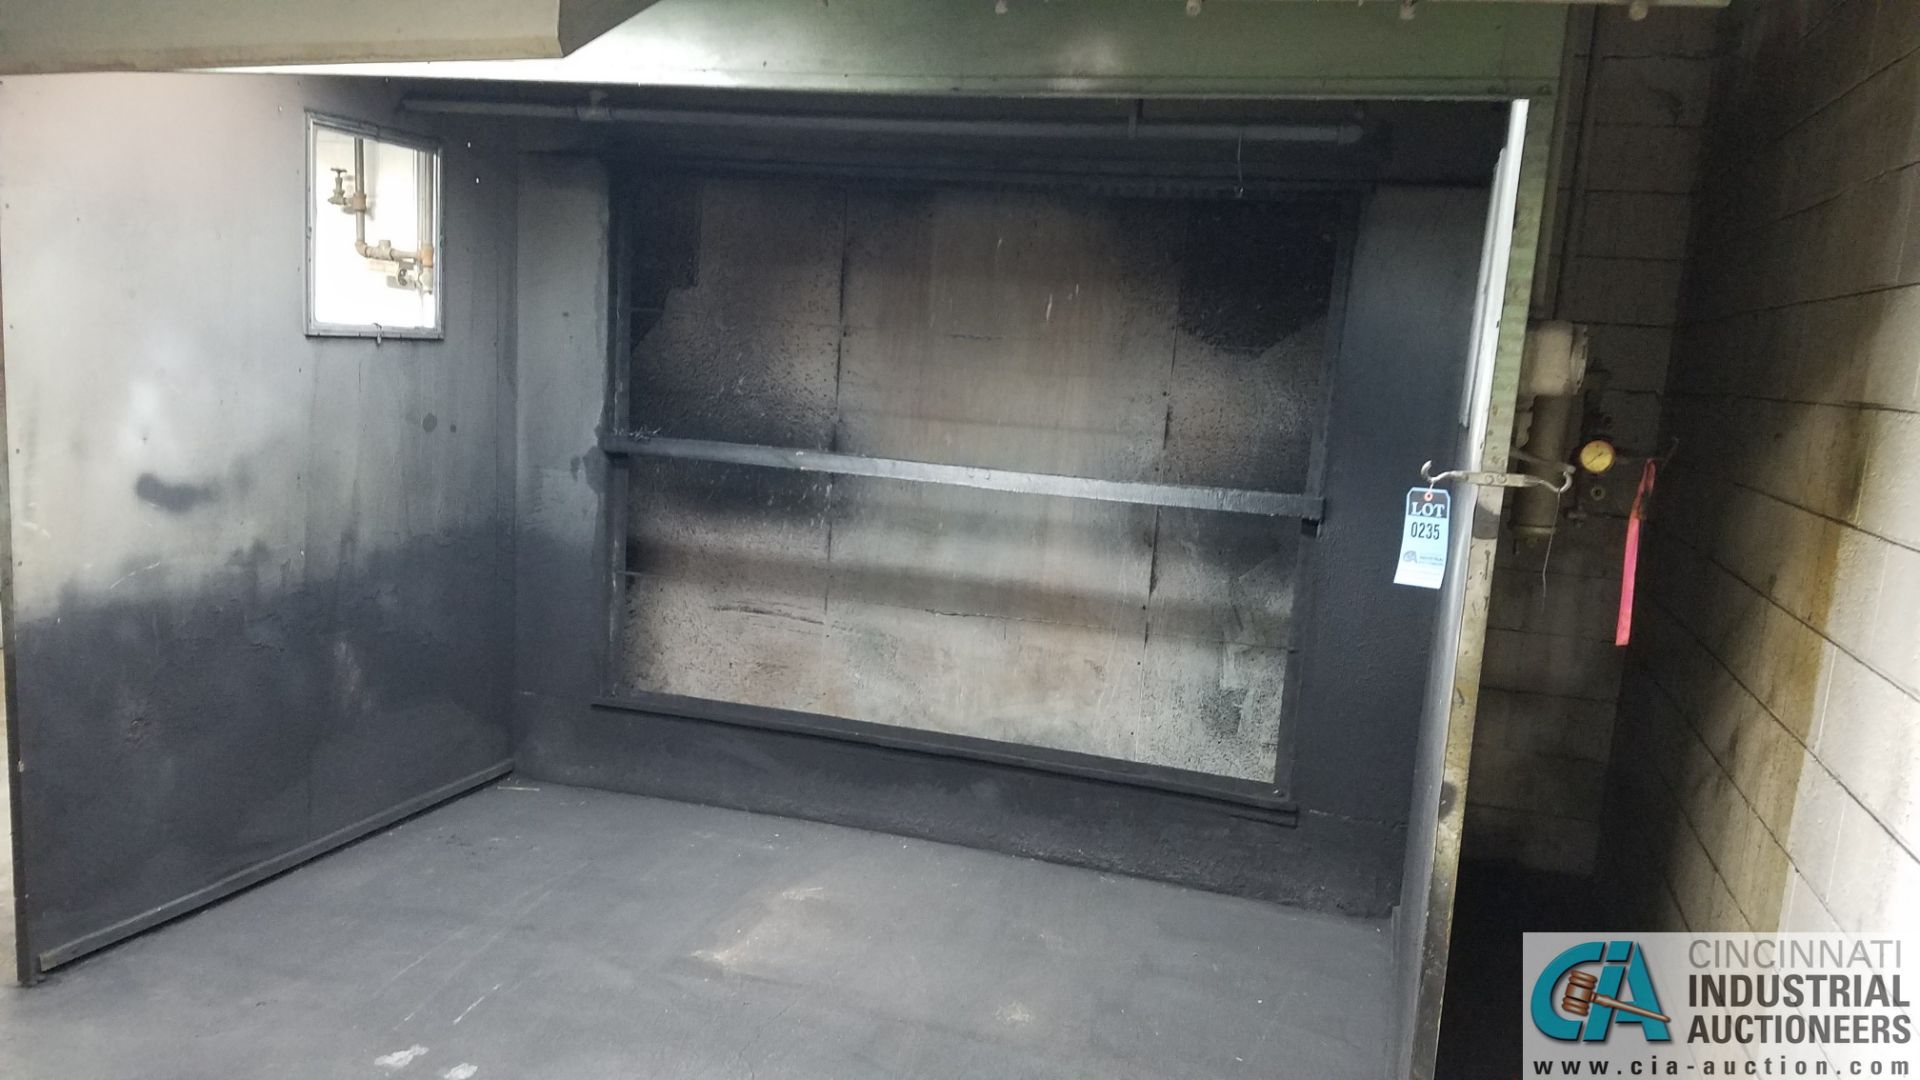 10' X 6' X 81" HIGH (APPROX.) REAR DRAFT DRIVE-IN PAINT BOOTH **BUYER MUST CAP EXHAUST THROUGH